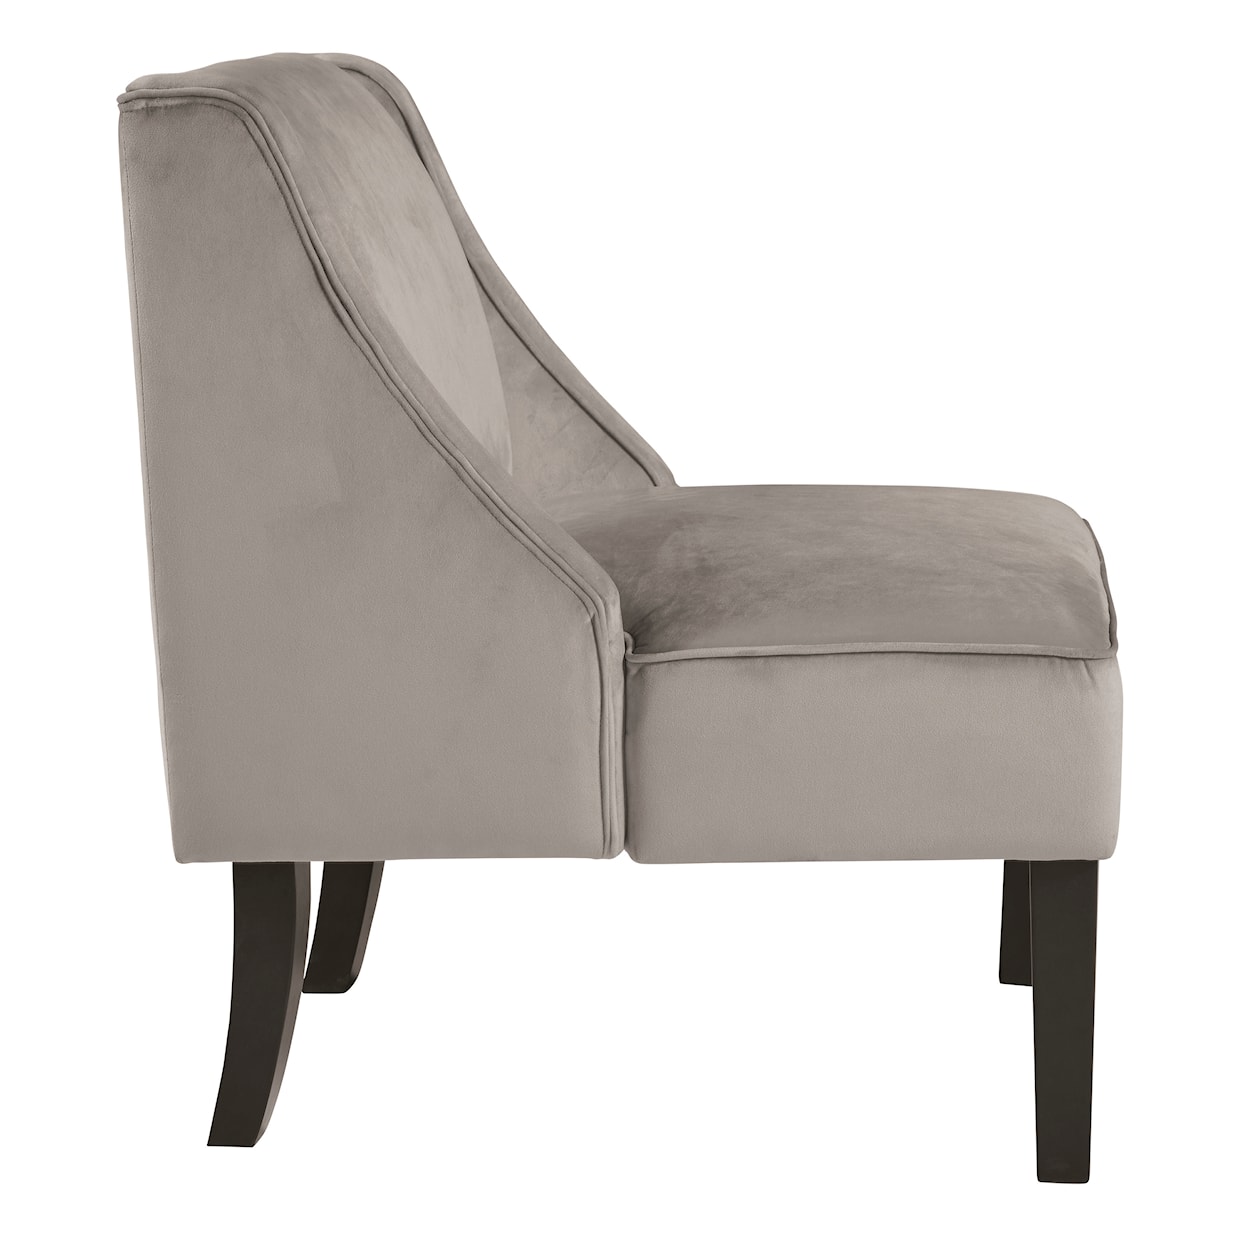 Ashley Furniture Signature Design Janesley Accent Chair